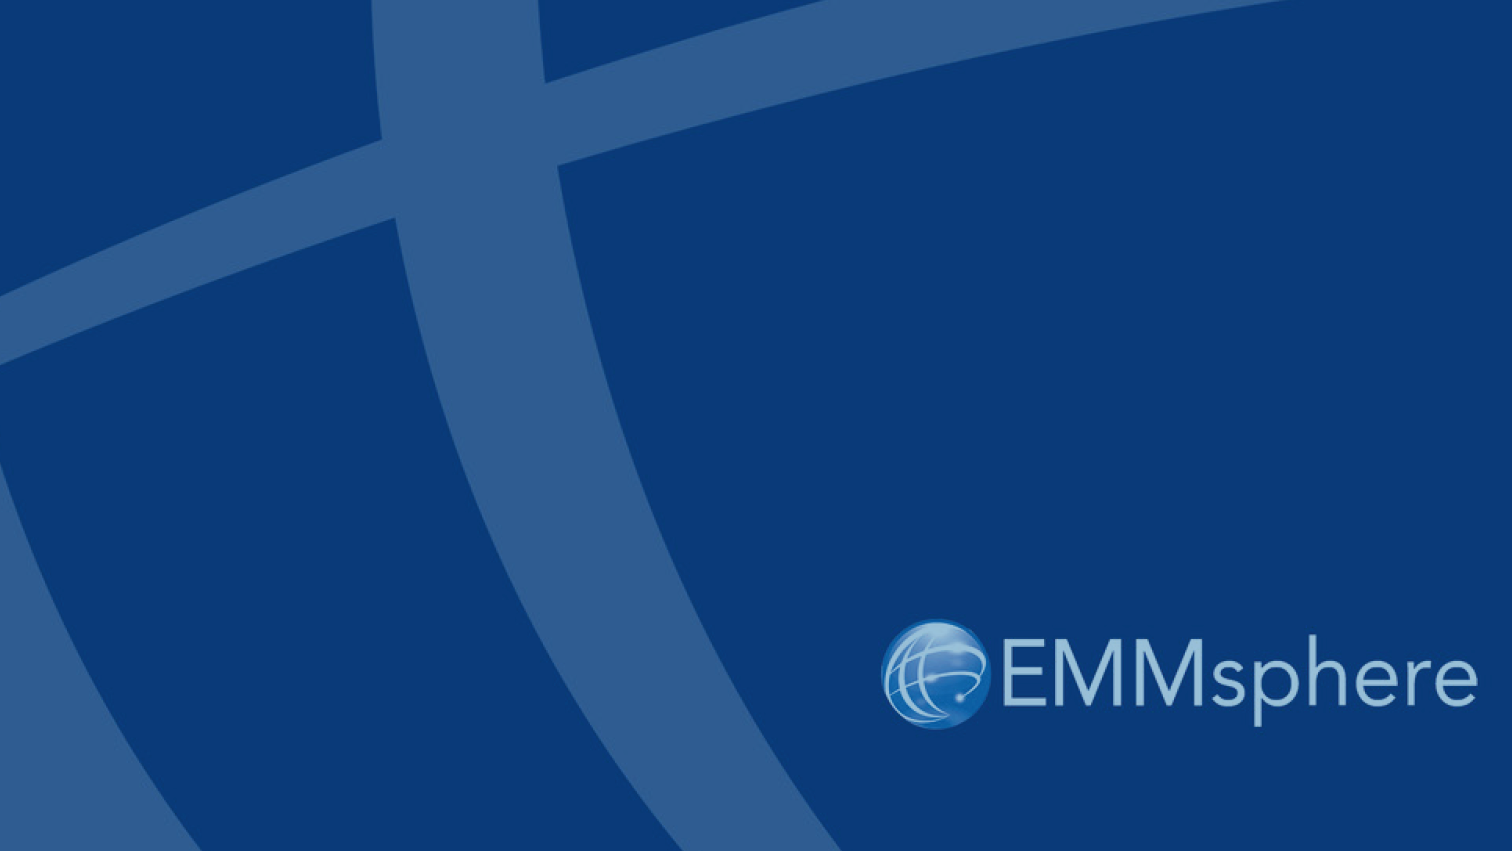 Emmsphere Services Services Overview